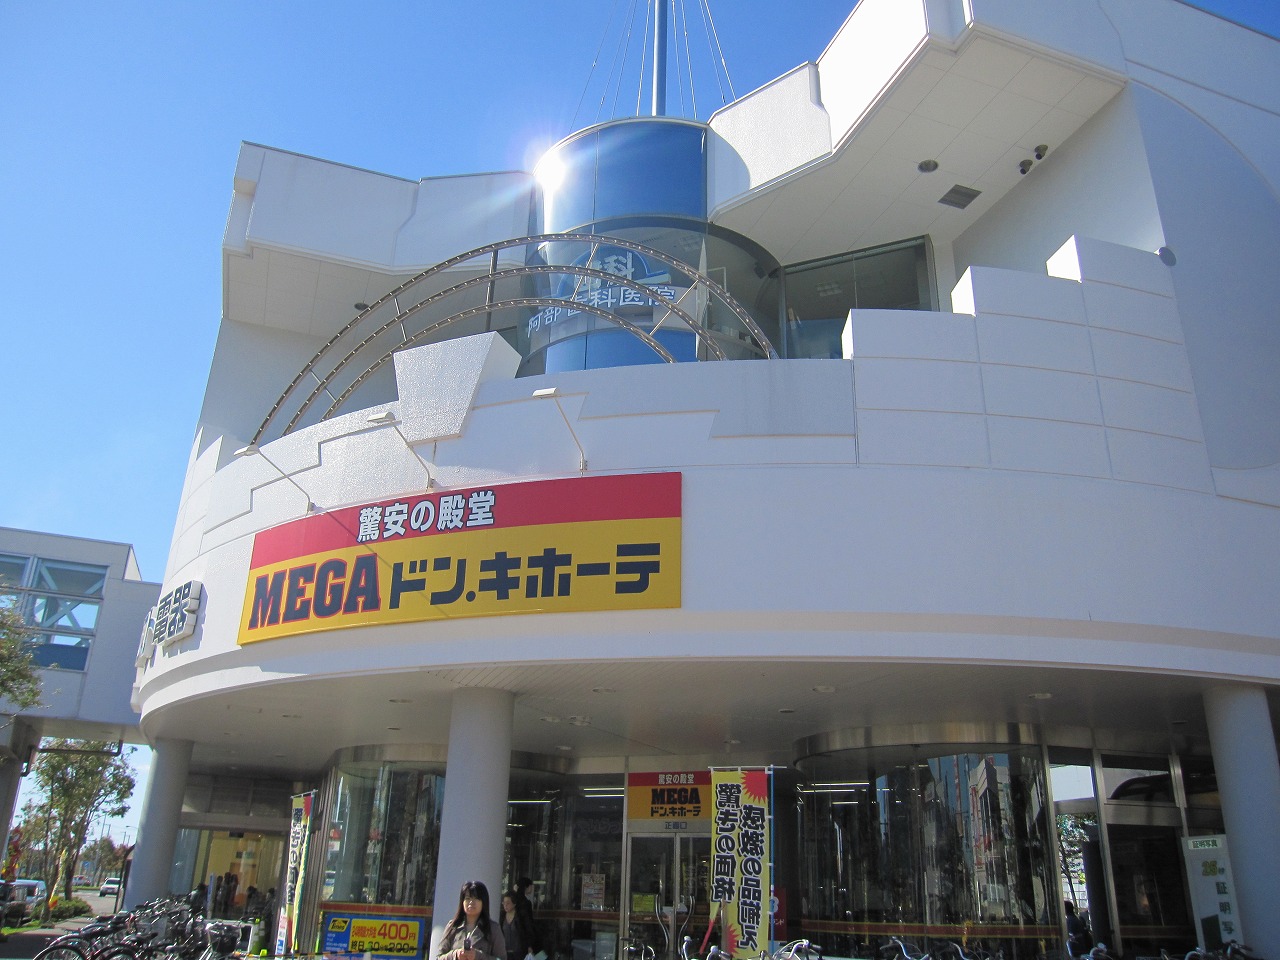 Home center. 736m until the outlet Best Tomakomai store (hardware store)